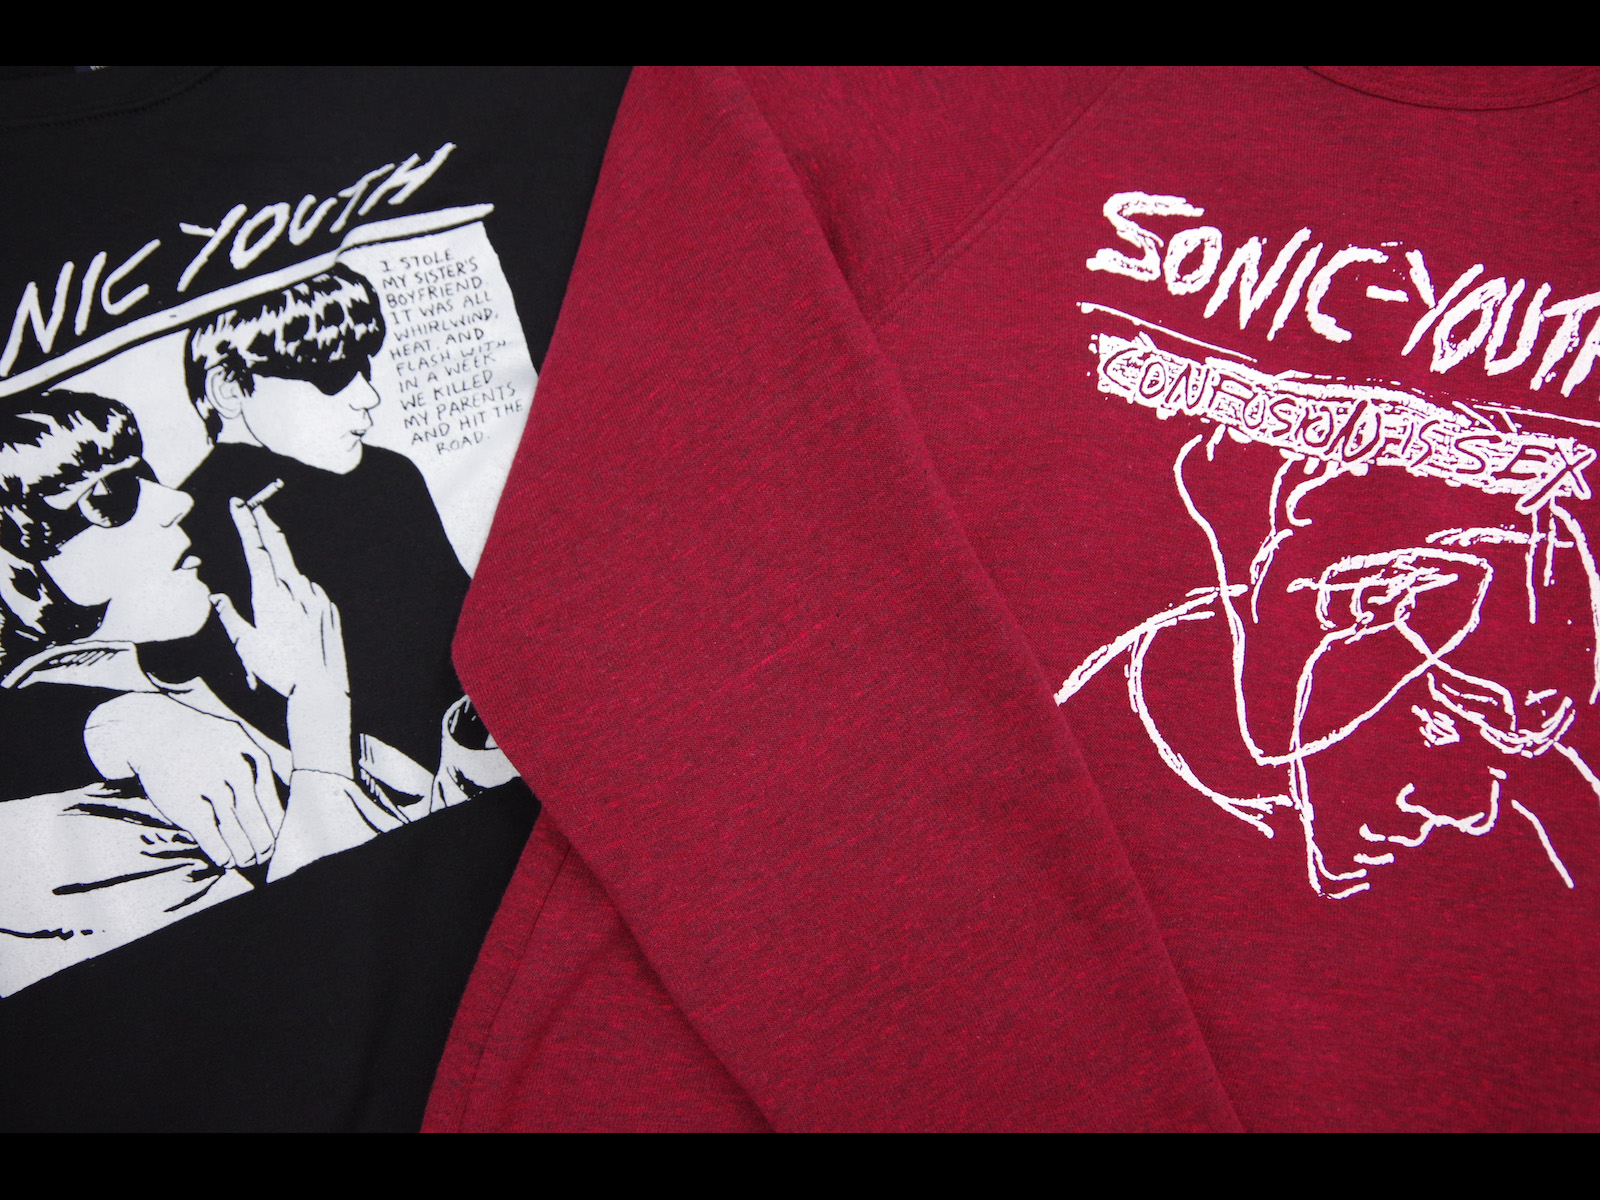 SONIC YOUTH – Official Sweater